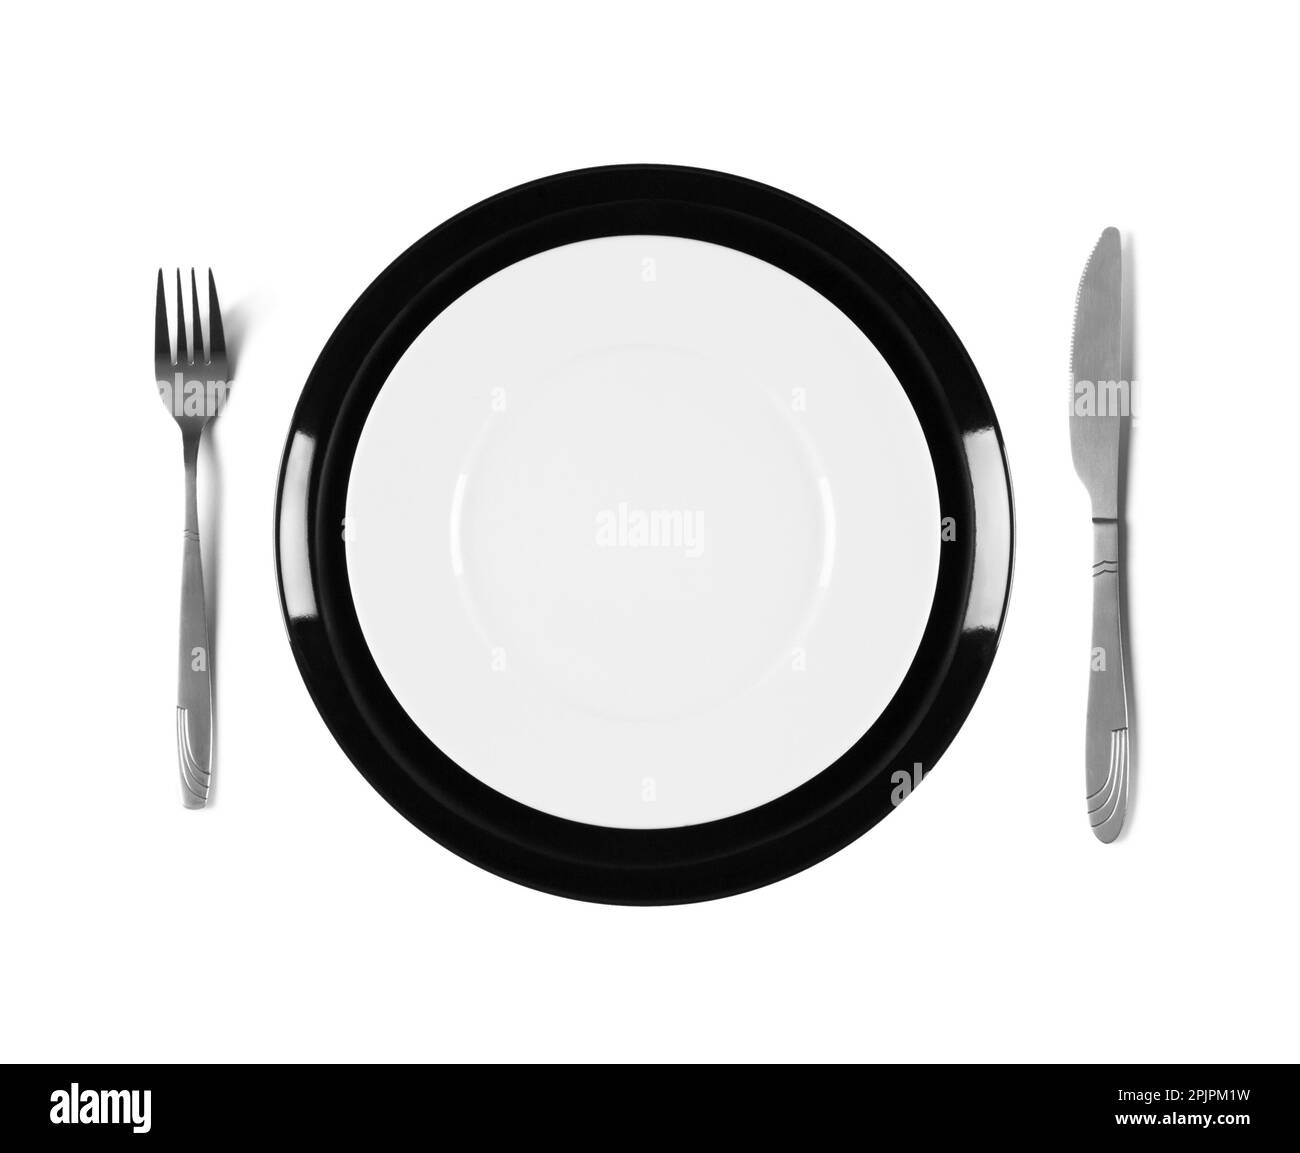 Two stacked black and white plates with fork and knife, isolated on white background Stock Photo